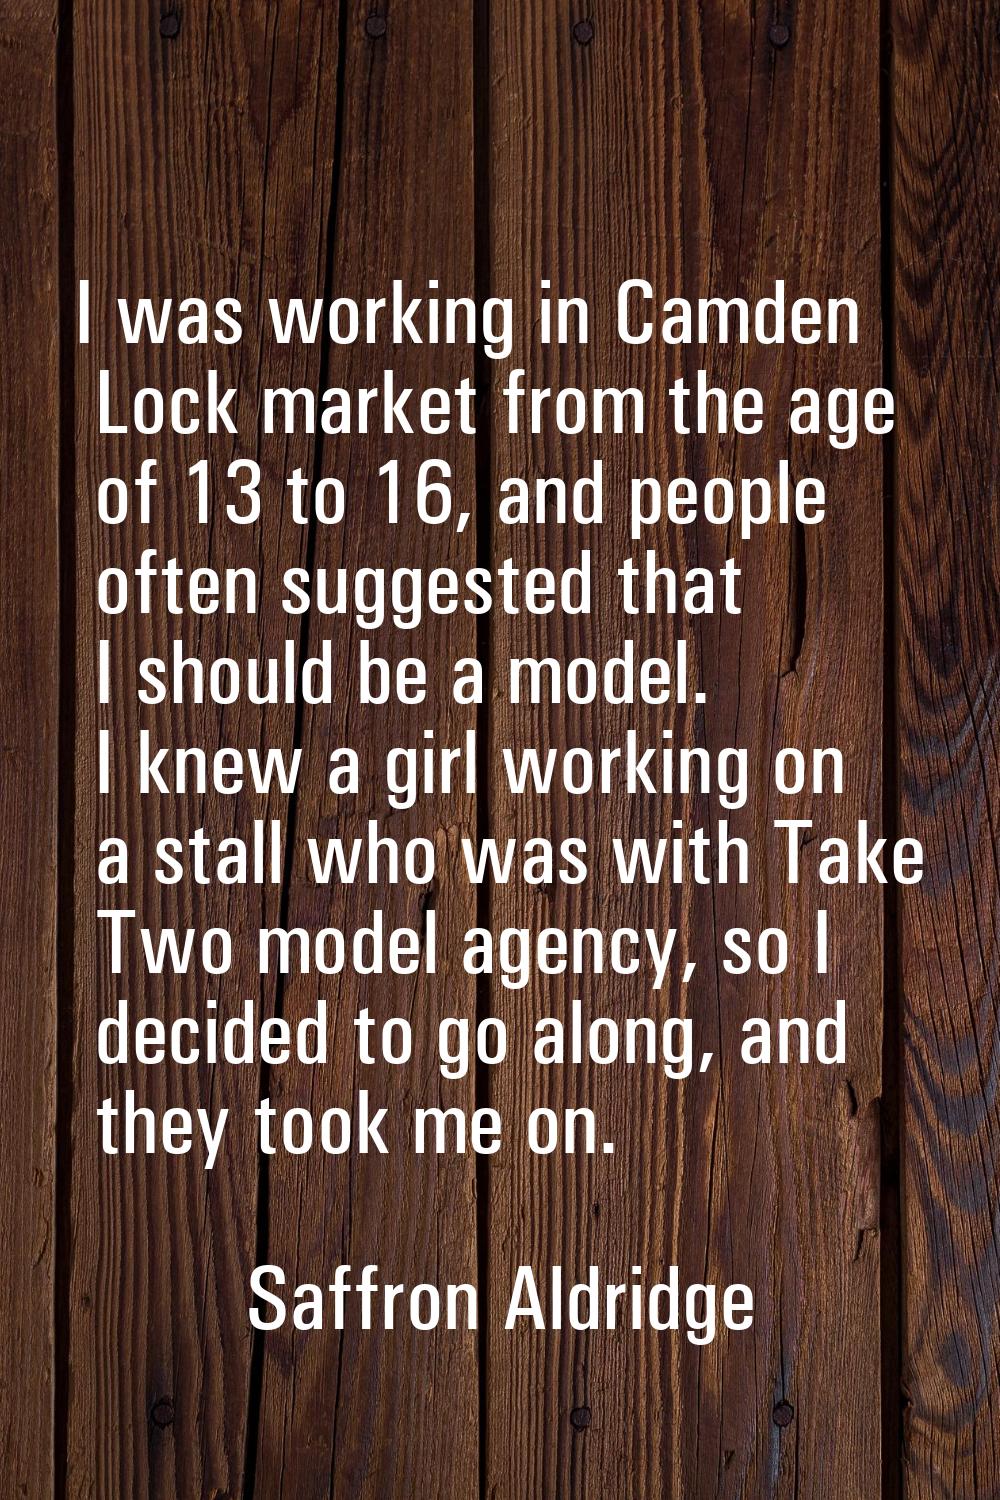 I was working in Camden Lock market from the age of 13 to 16, and people often suggested that I sho